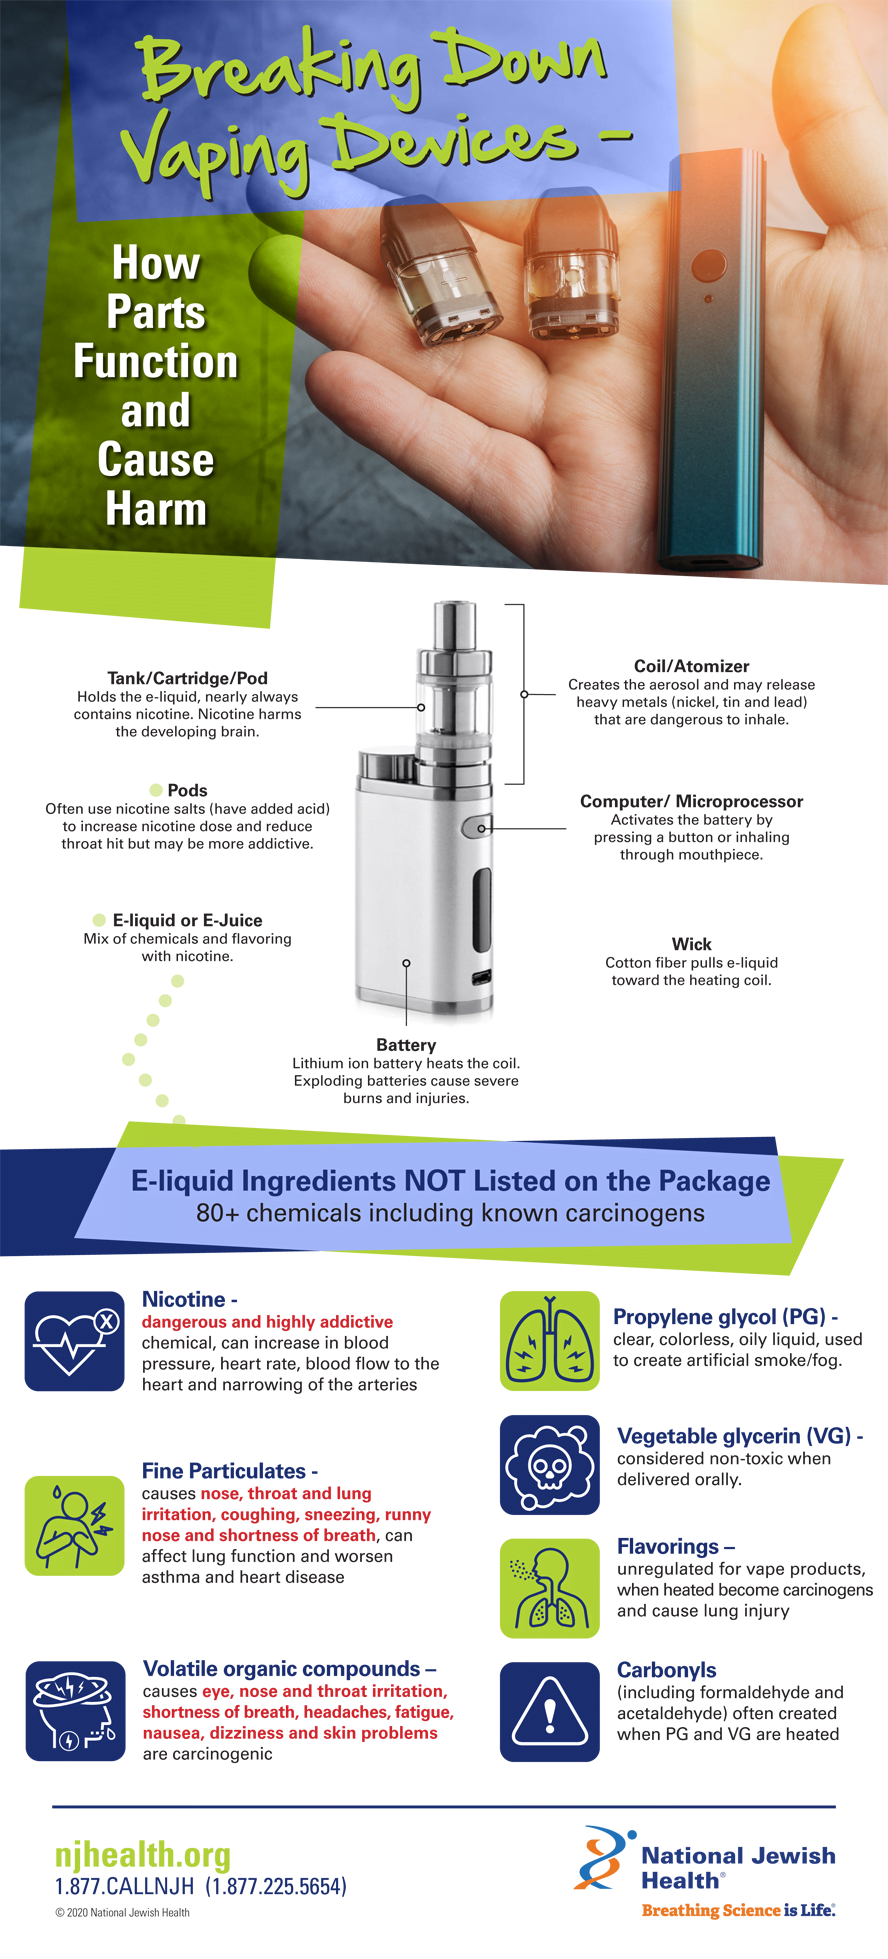 Vaping Devices - infographic